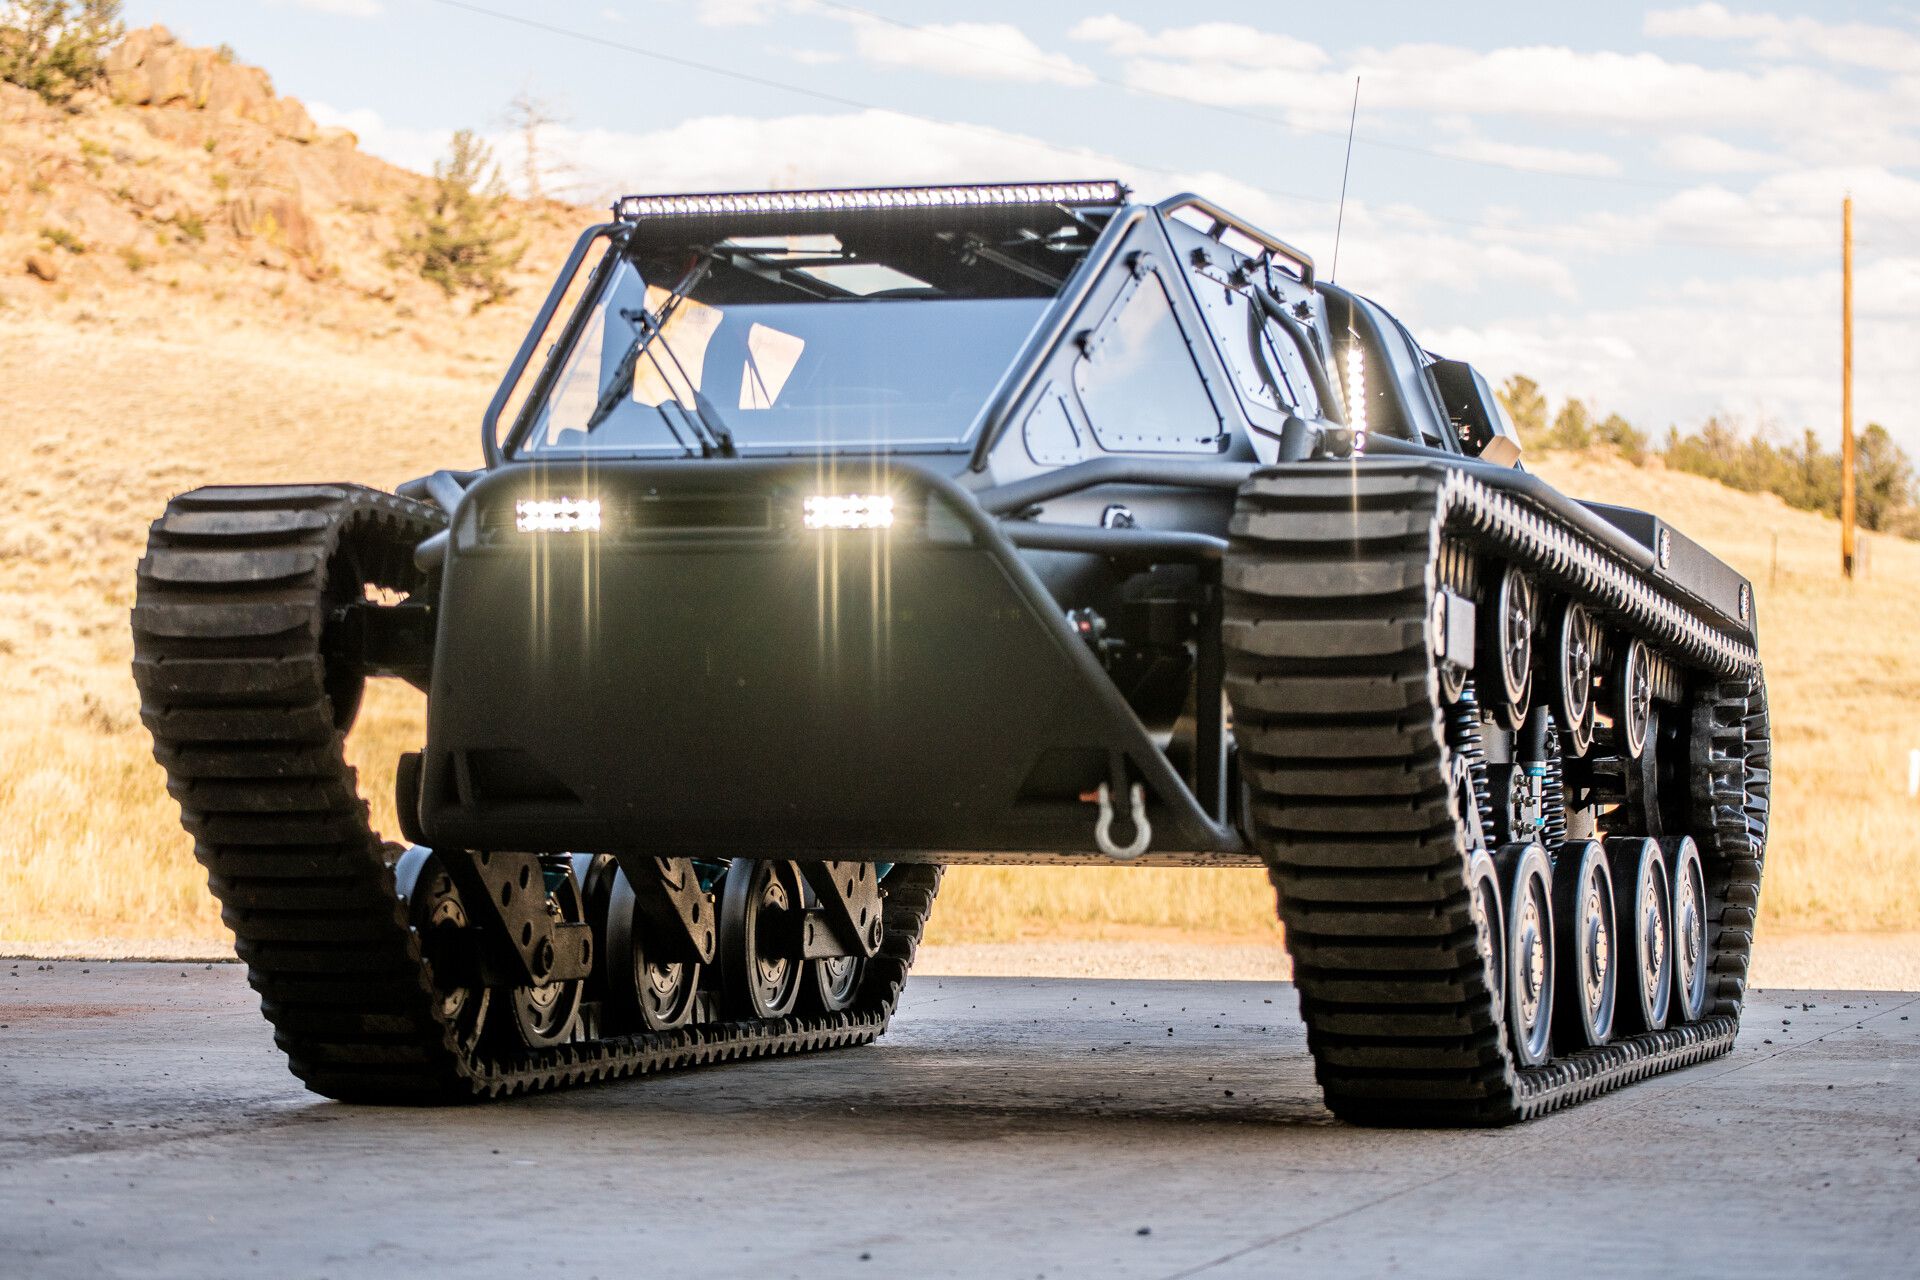 Destroy Your Foes And Everything Else In Your Path With This High-Speed Tracked Vehicle